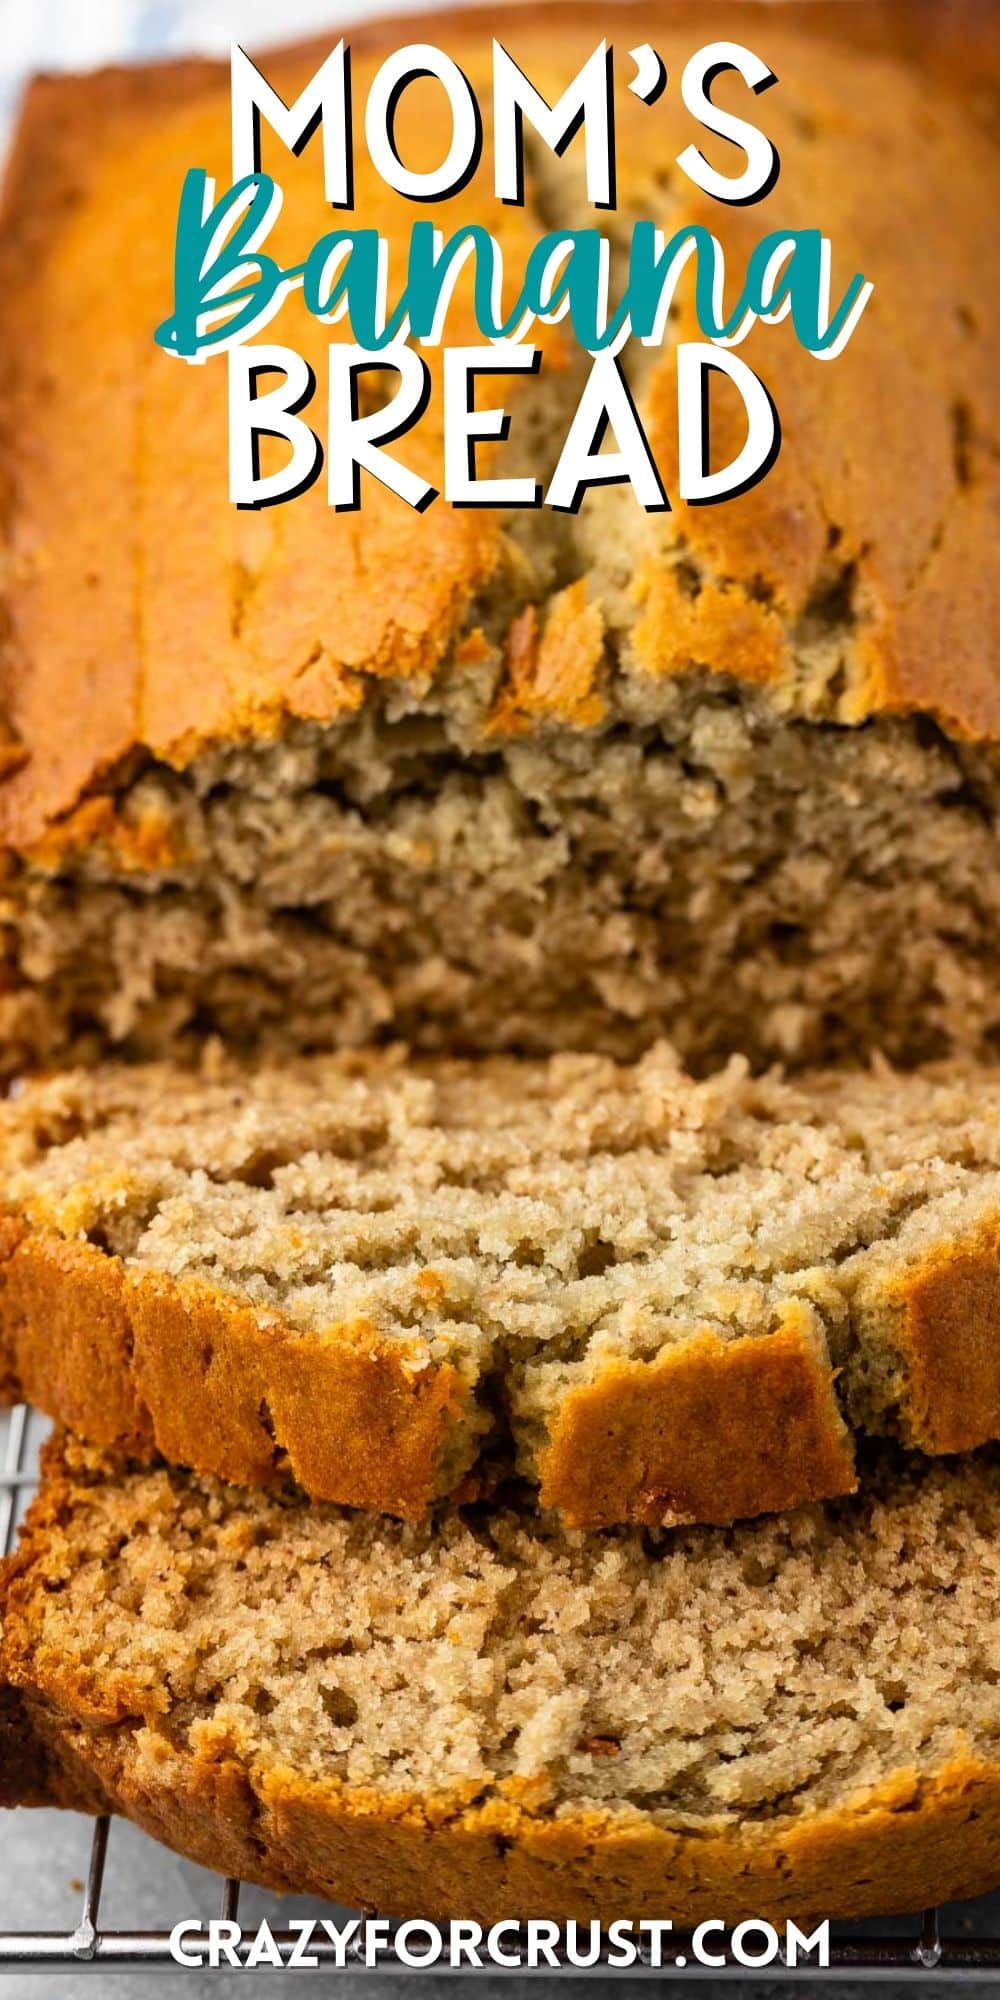 sliced banana bread on a drying rack with words on the image.